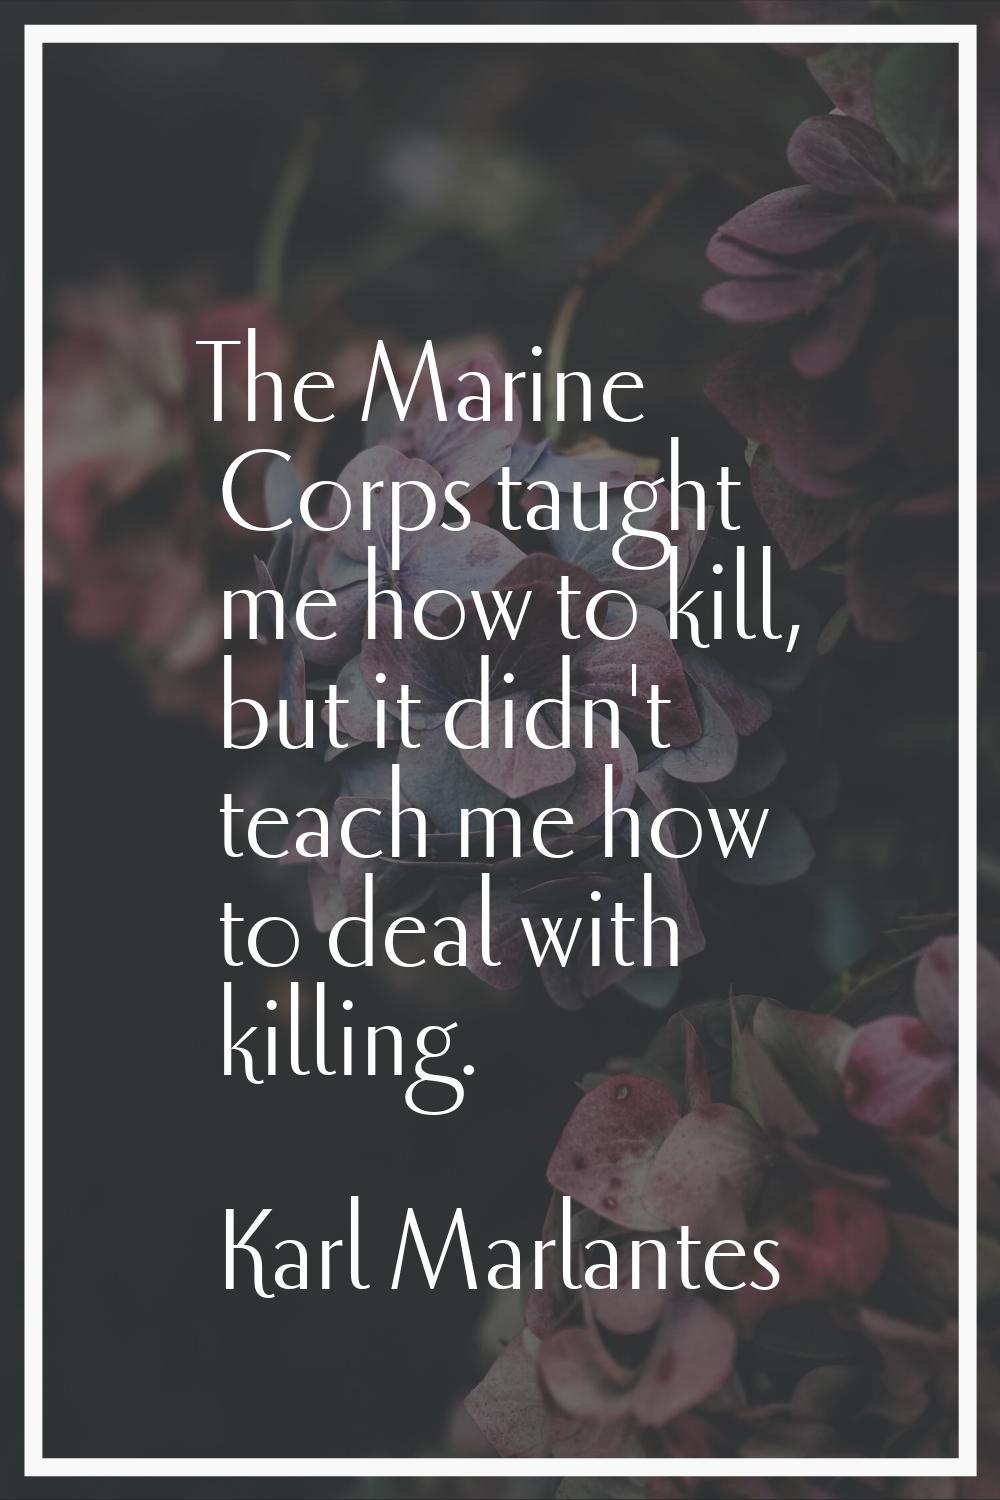 The Marine Corps taught me how to kill, but it didn't teach me how to deal with killing.